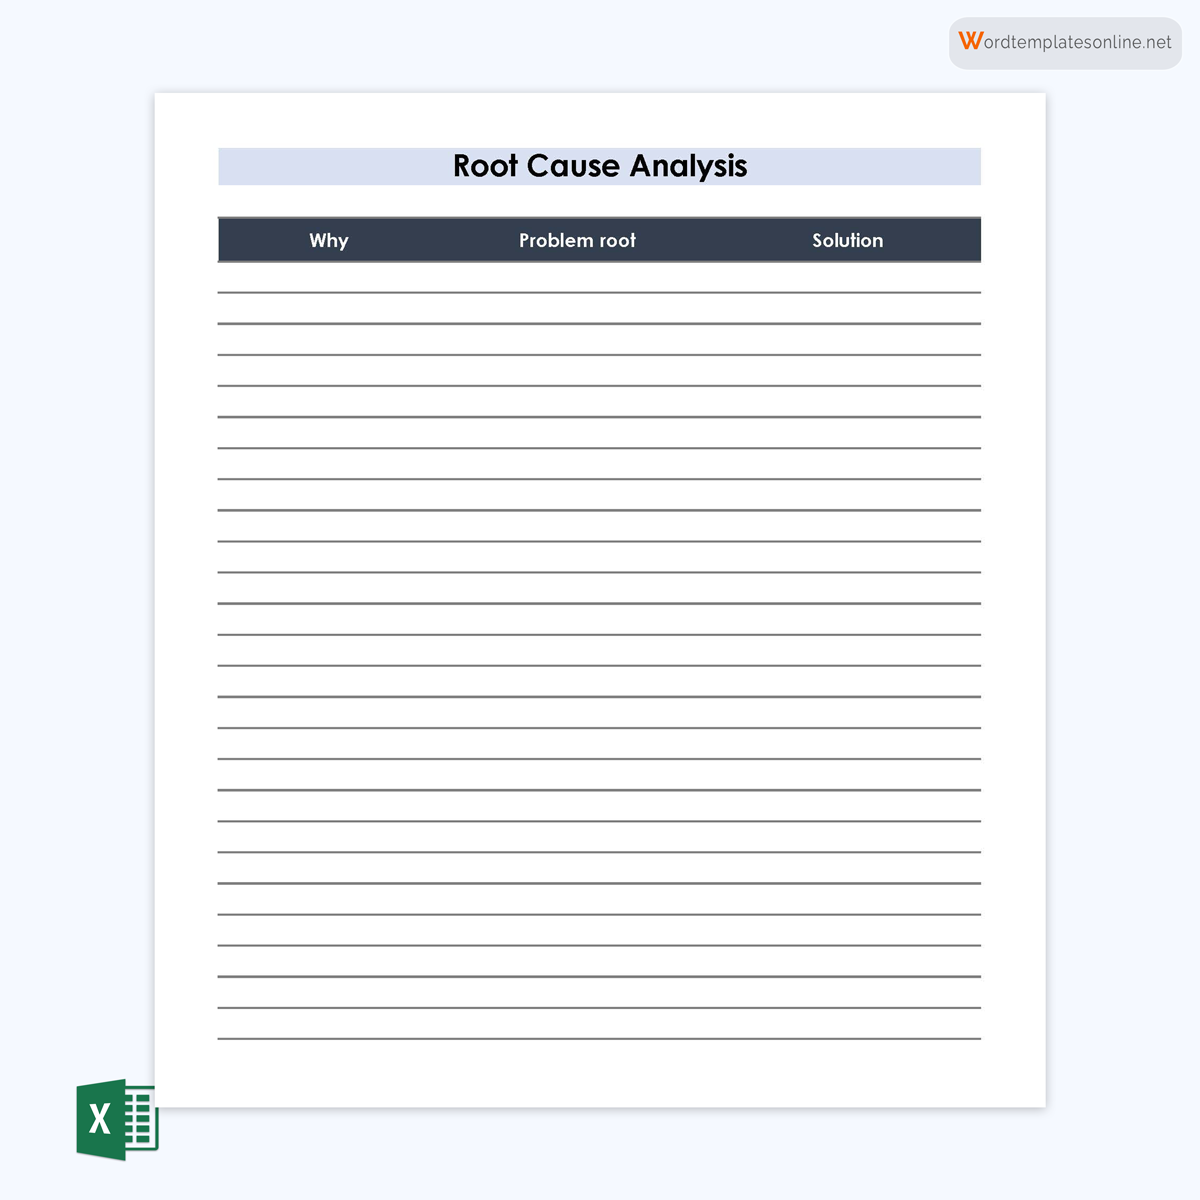 Customizable root cause analysis template in Excel 11